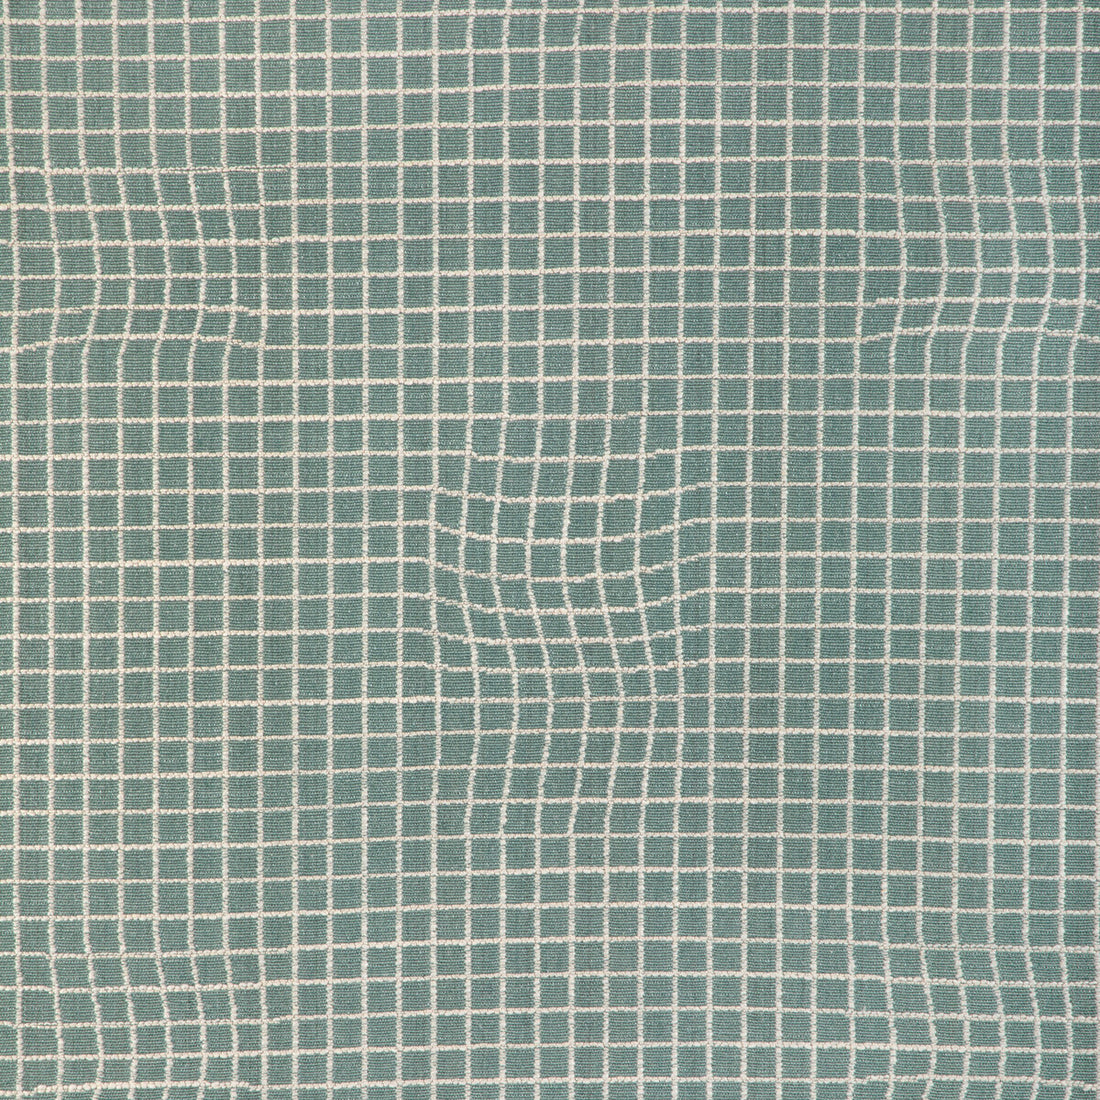 Armature fabric in seaglass color - pattern GWF-3792.13.0 - by Lee Jofa Modern in the Kelly Wearstler VII collection